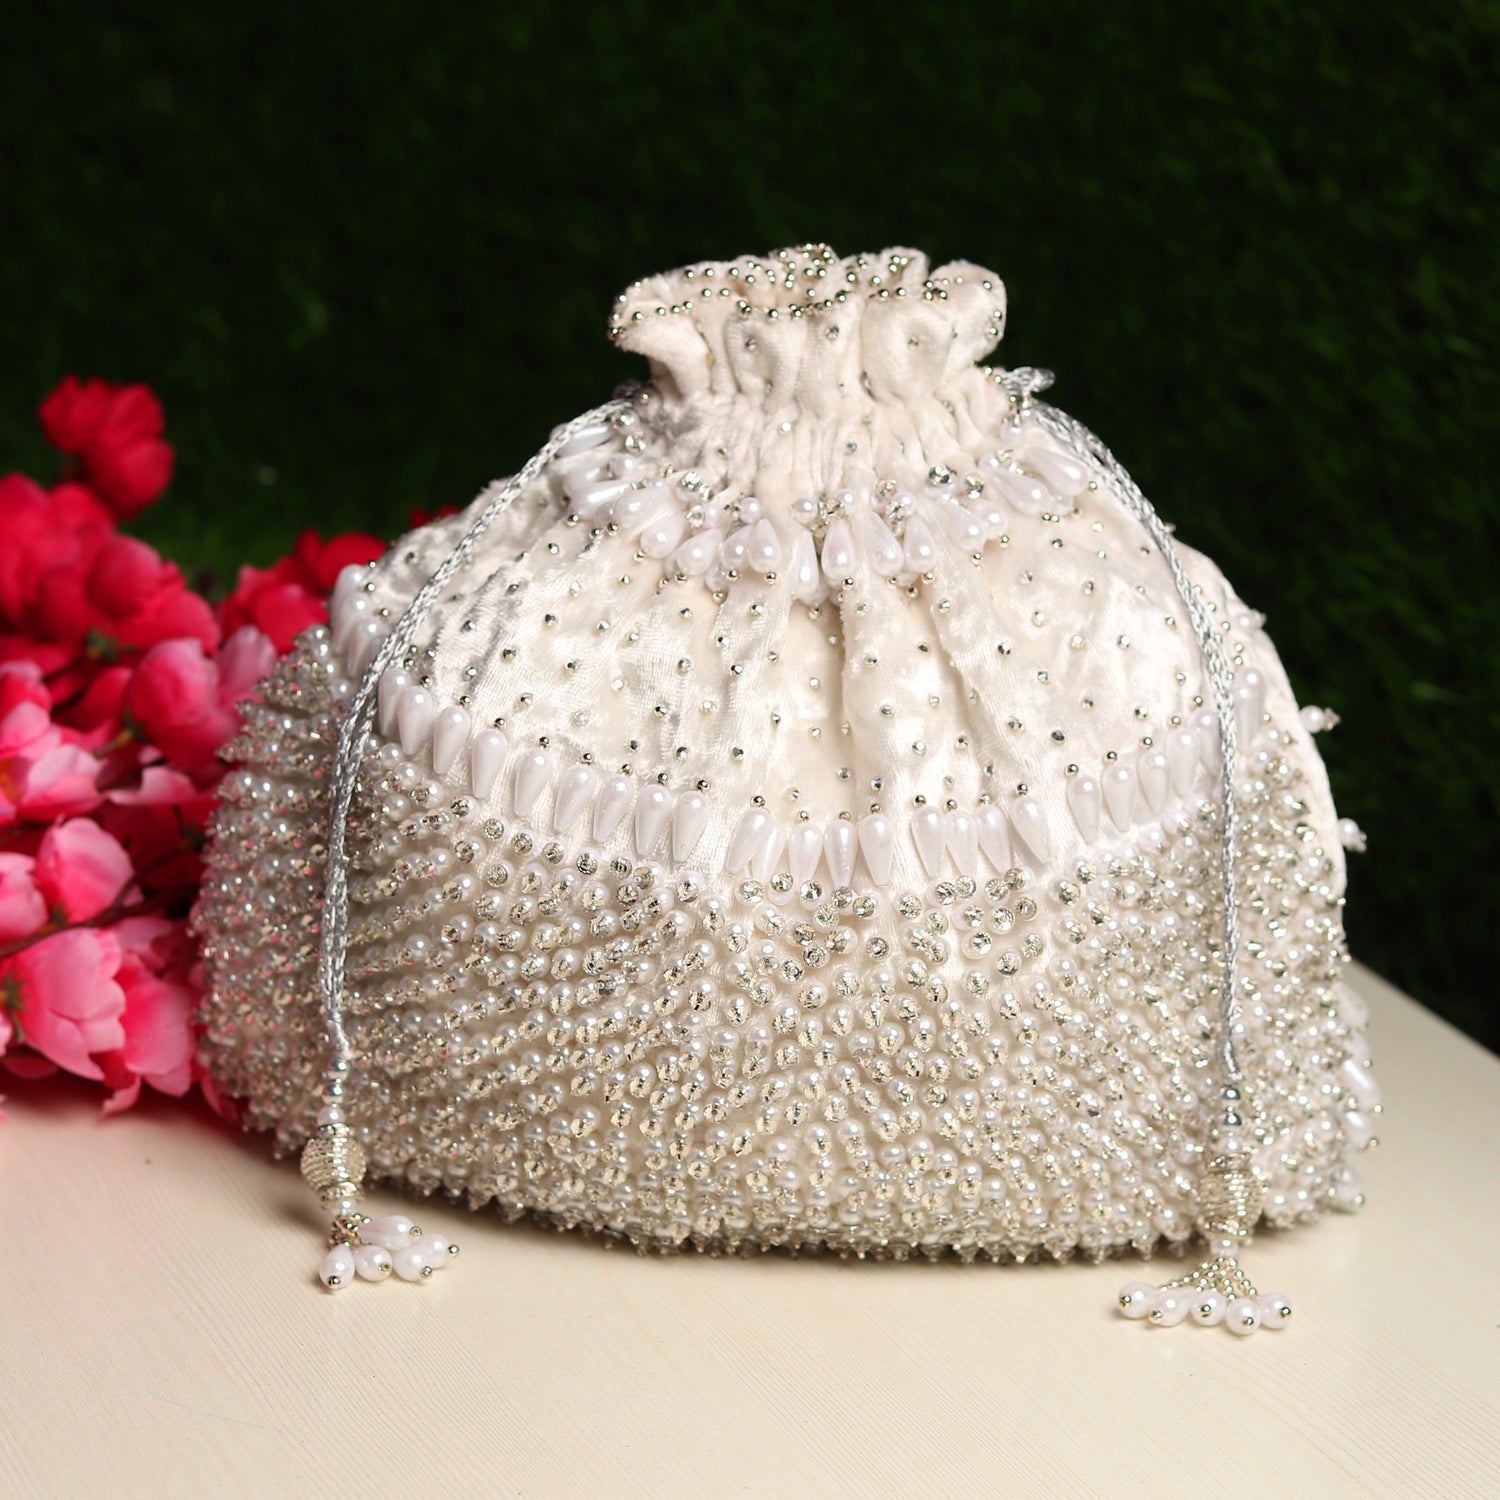 Rhinestone Bridal Clutch With Tassels And Pave Diamond Perfect For Evening  Events And Weddings From Yuoy, $24 | DHgate.Com